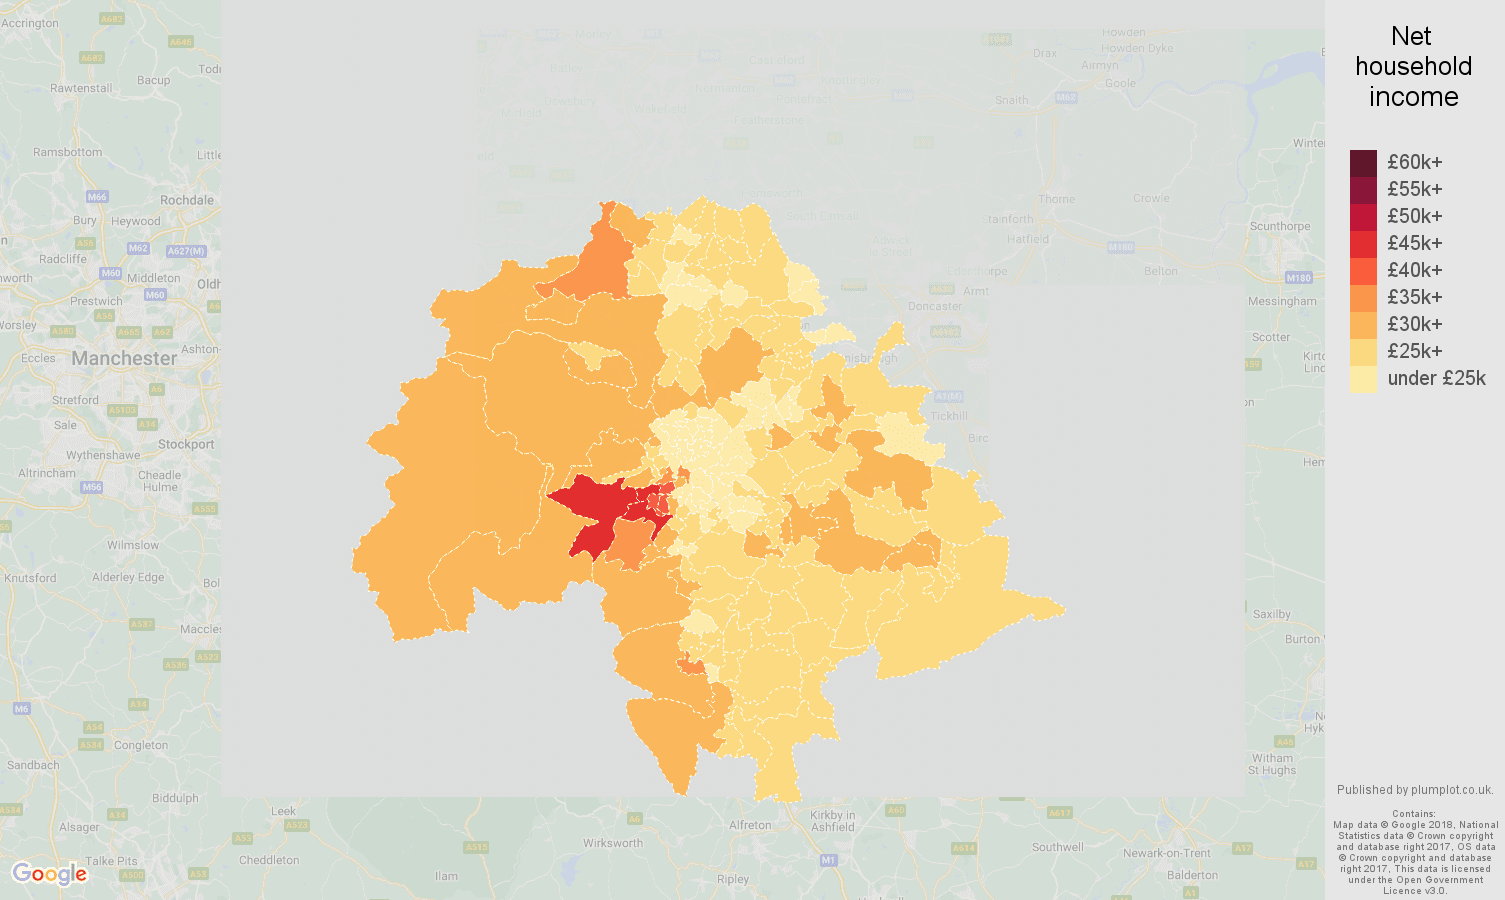 Sheffield net household income map